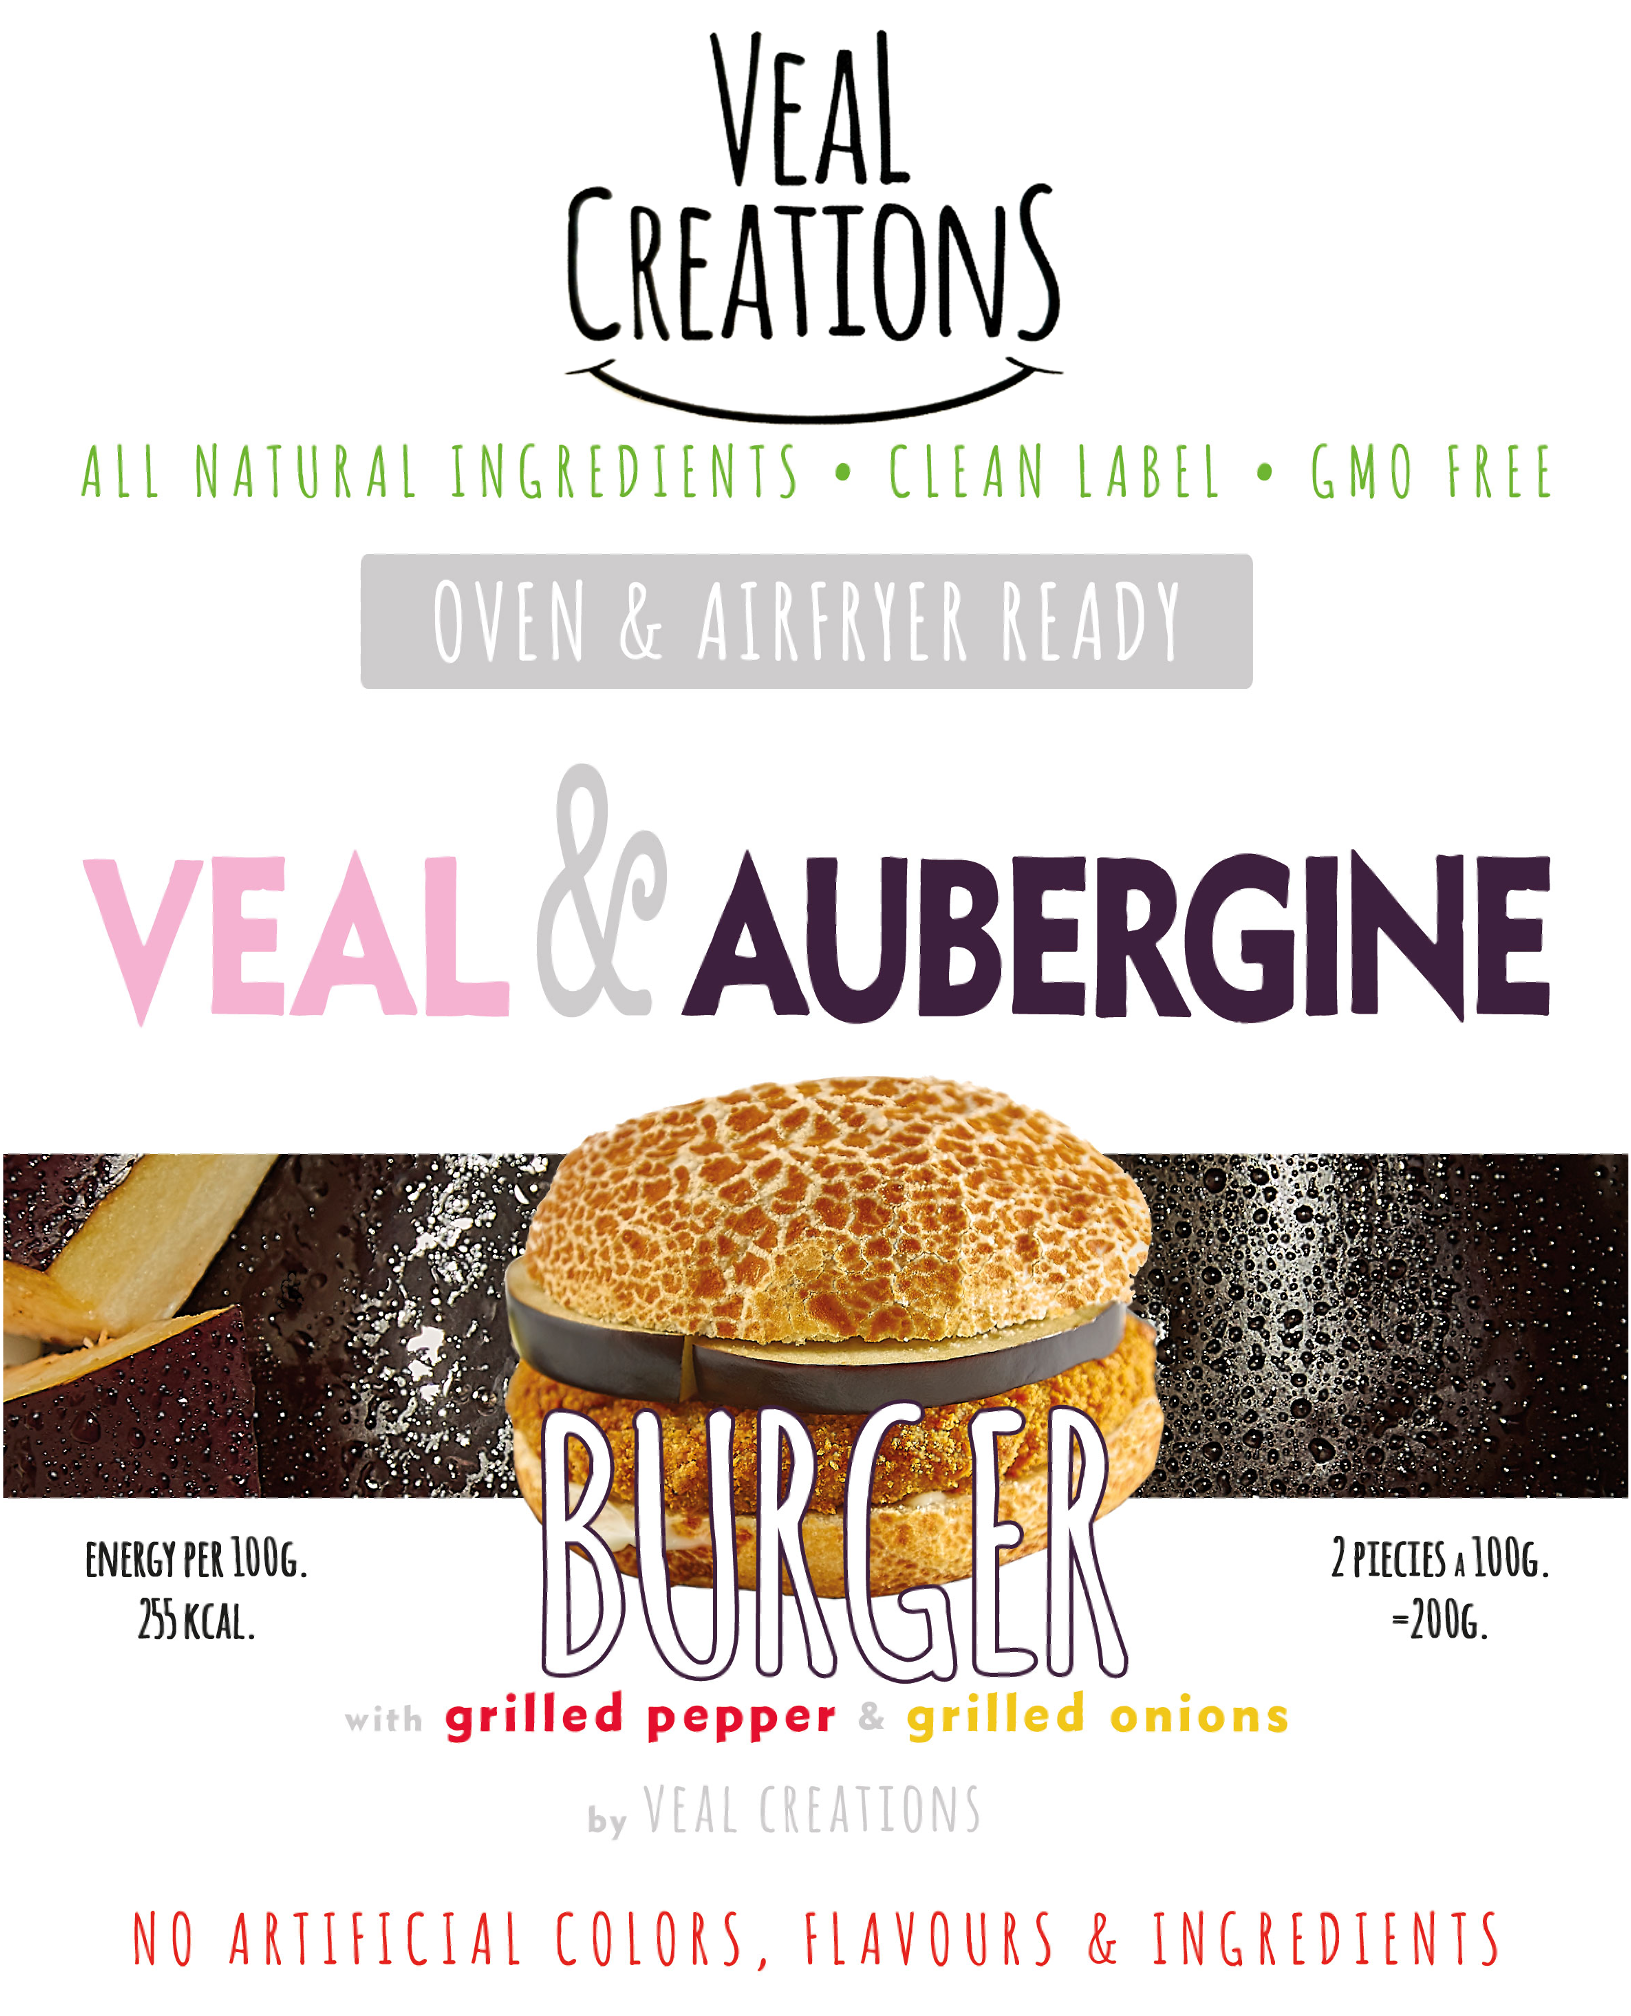 veal creations logo